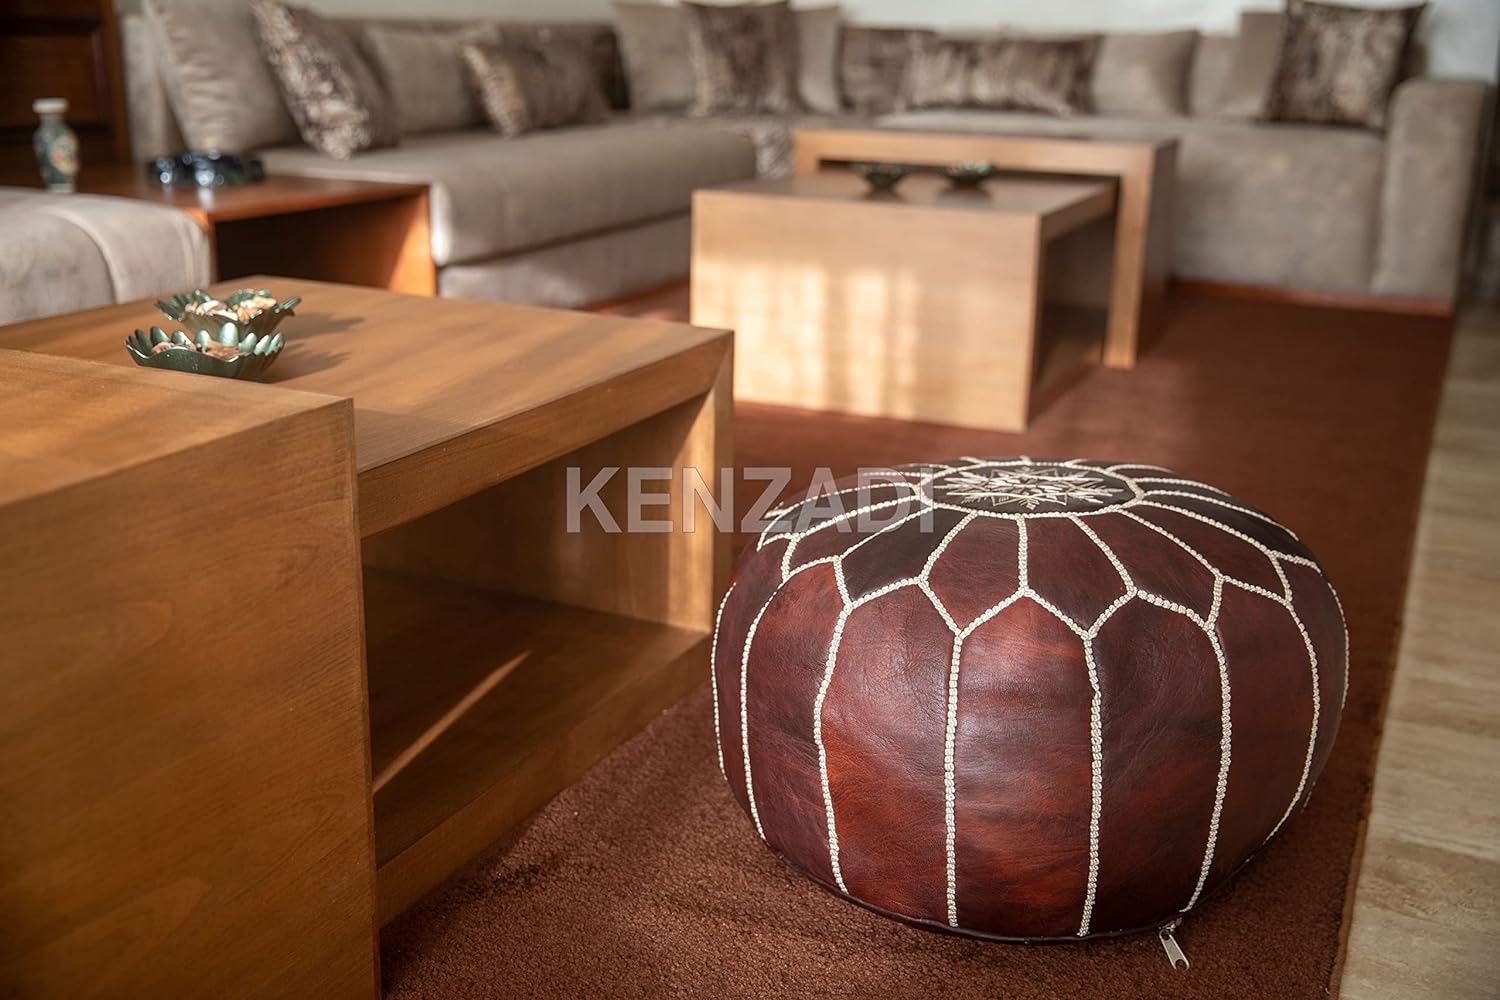 Stuffed Genuine Leather Pouf Handmade Stitched in Marrakech by Moroccan Artisans (Dark Brown) - Handmade by My Poufs